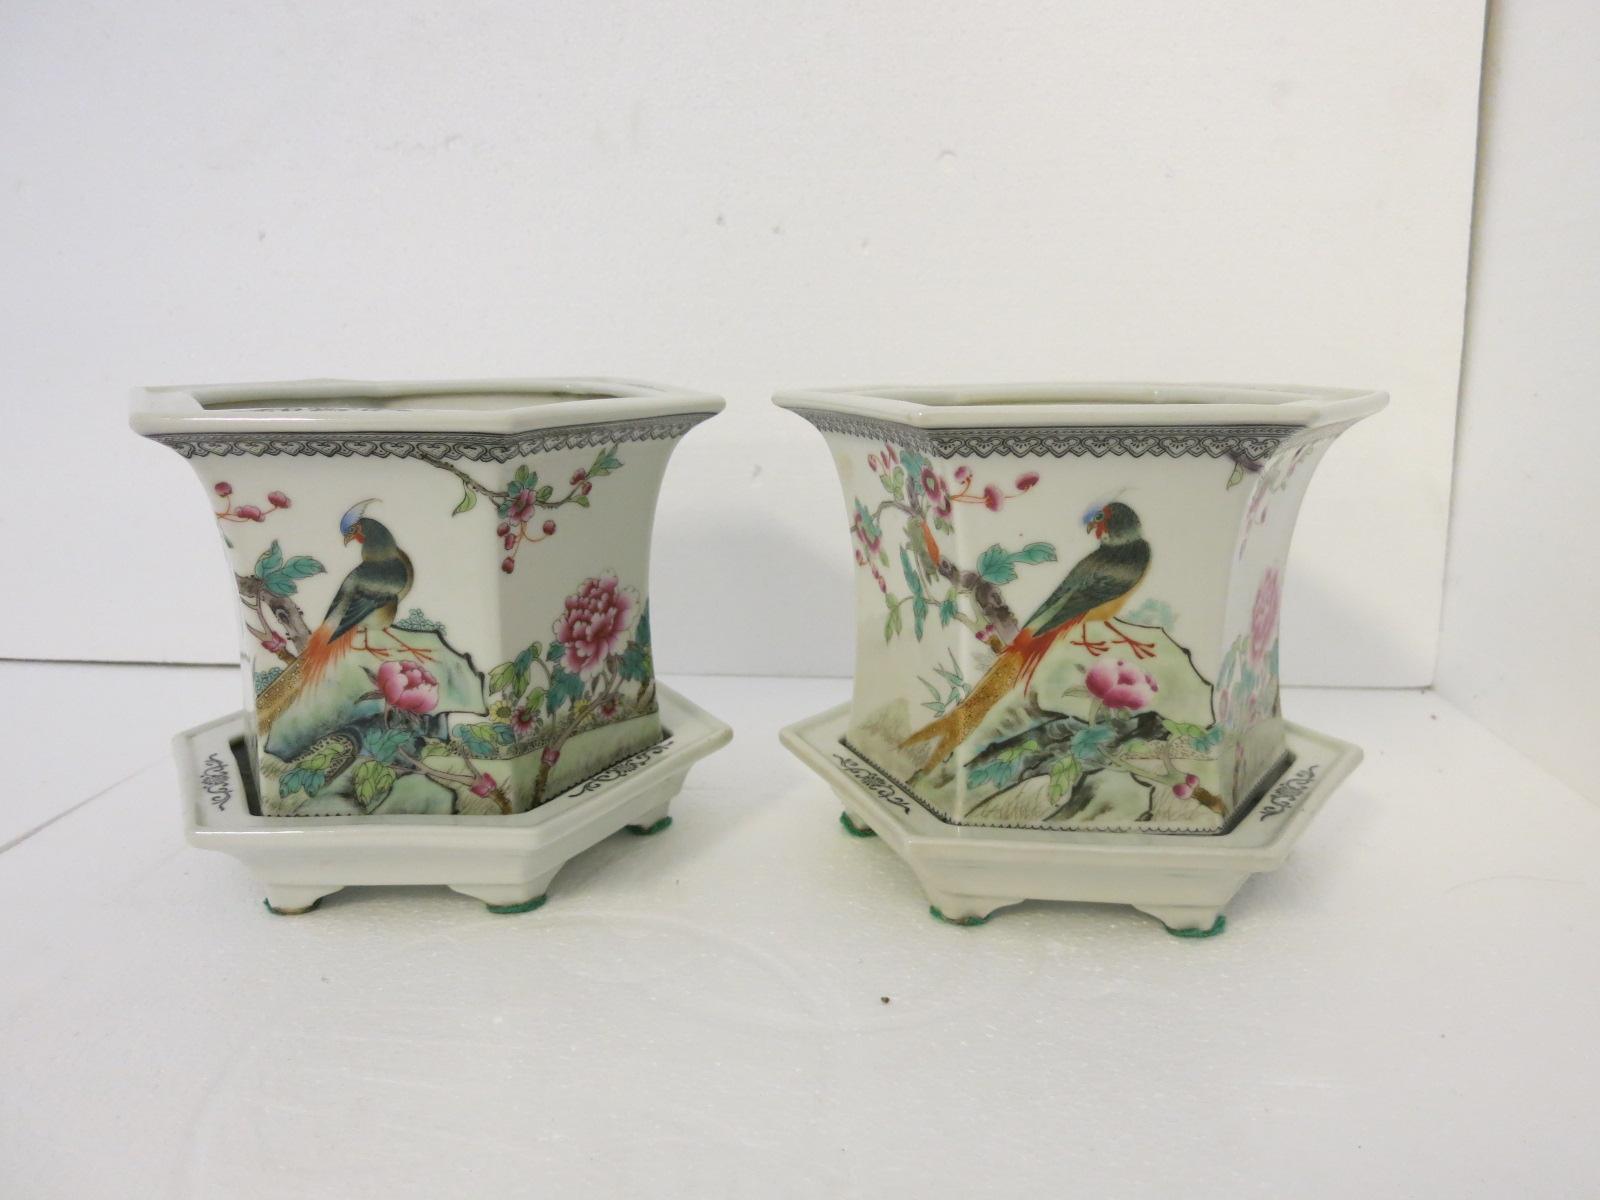 Chinese porcelain planters and their plates. Two available.

Planter: Diameter 7.5